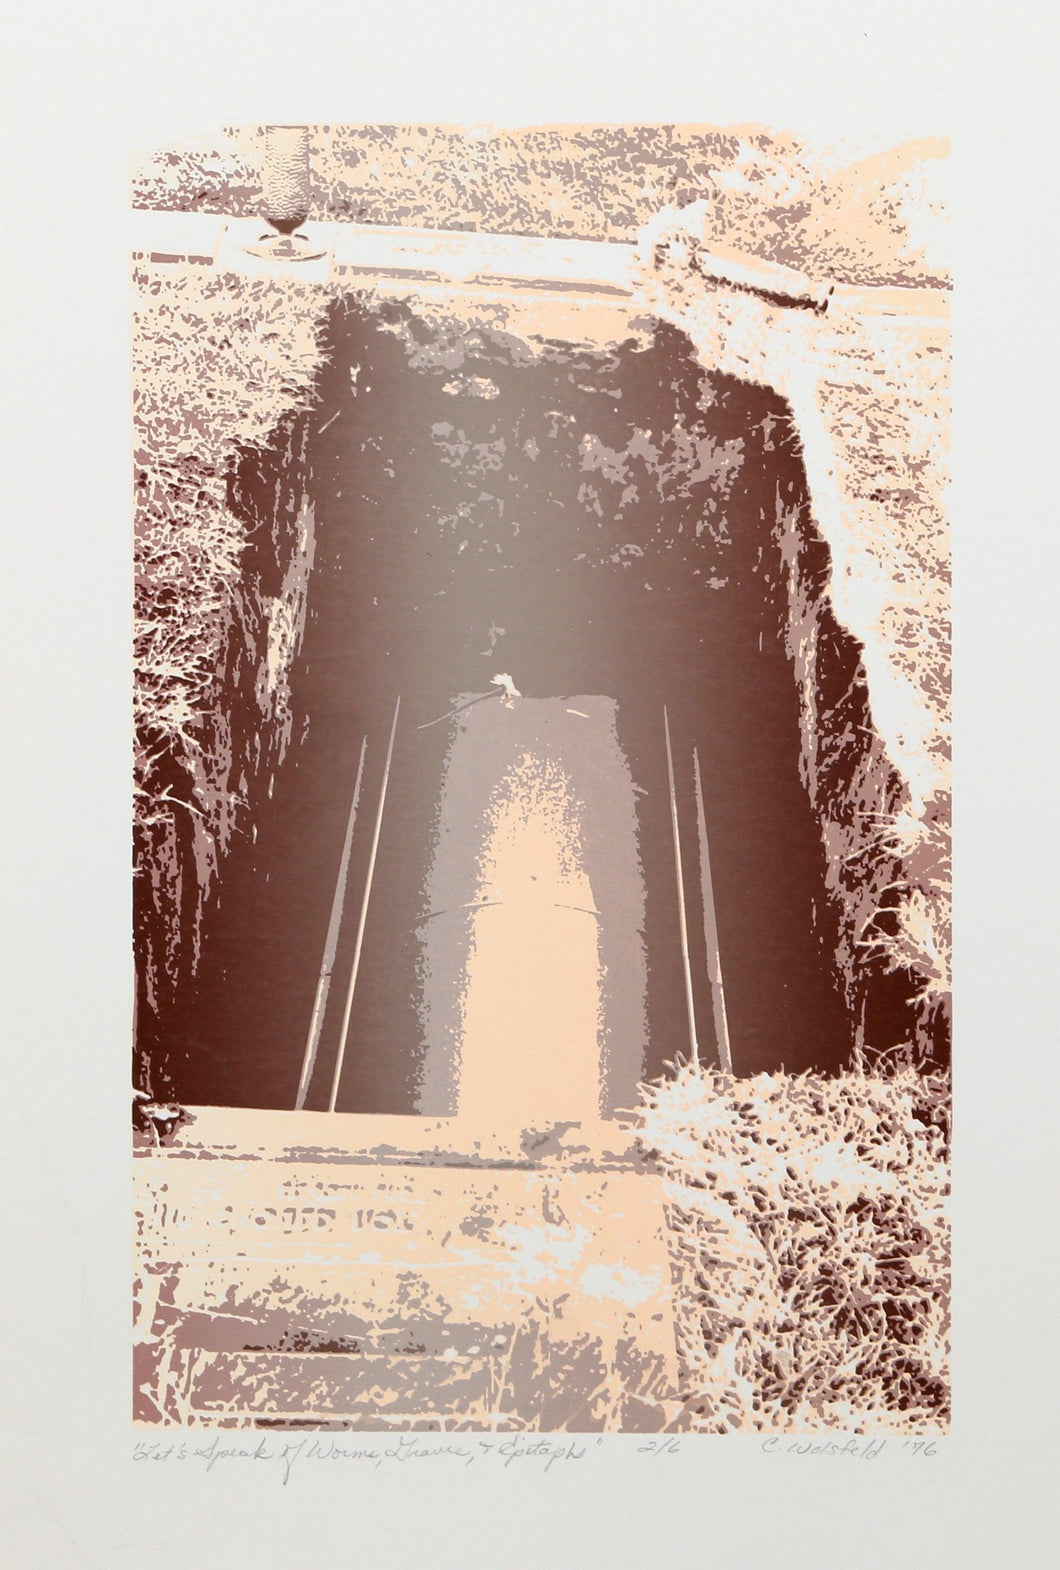 Let's Speak of Worms, Graves, and Epitaphs Screenprint | Cindy Wolsfeld,{{product.type}}